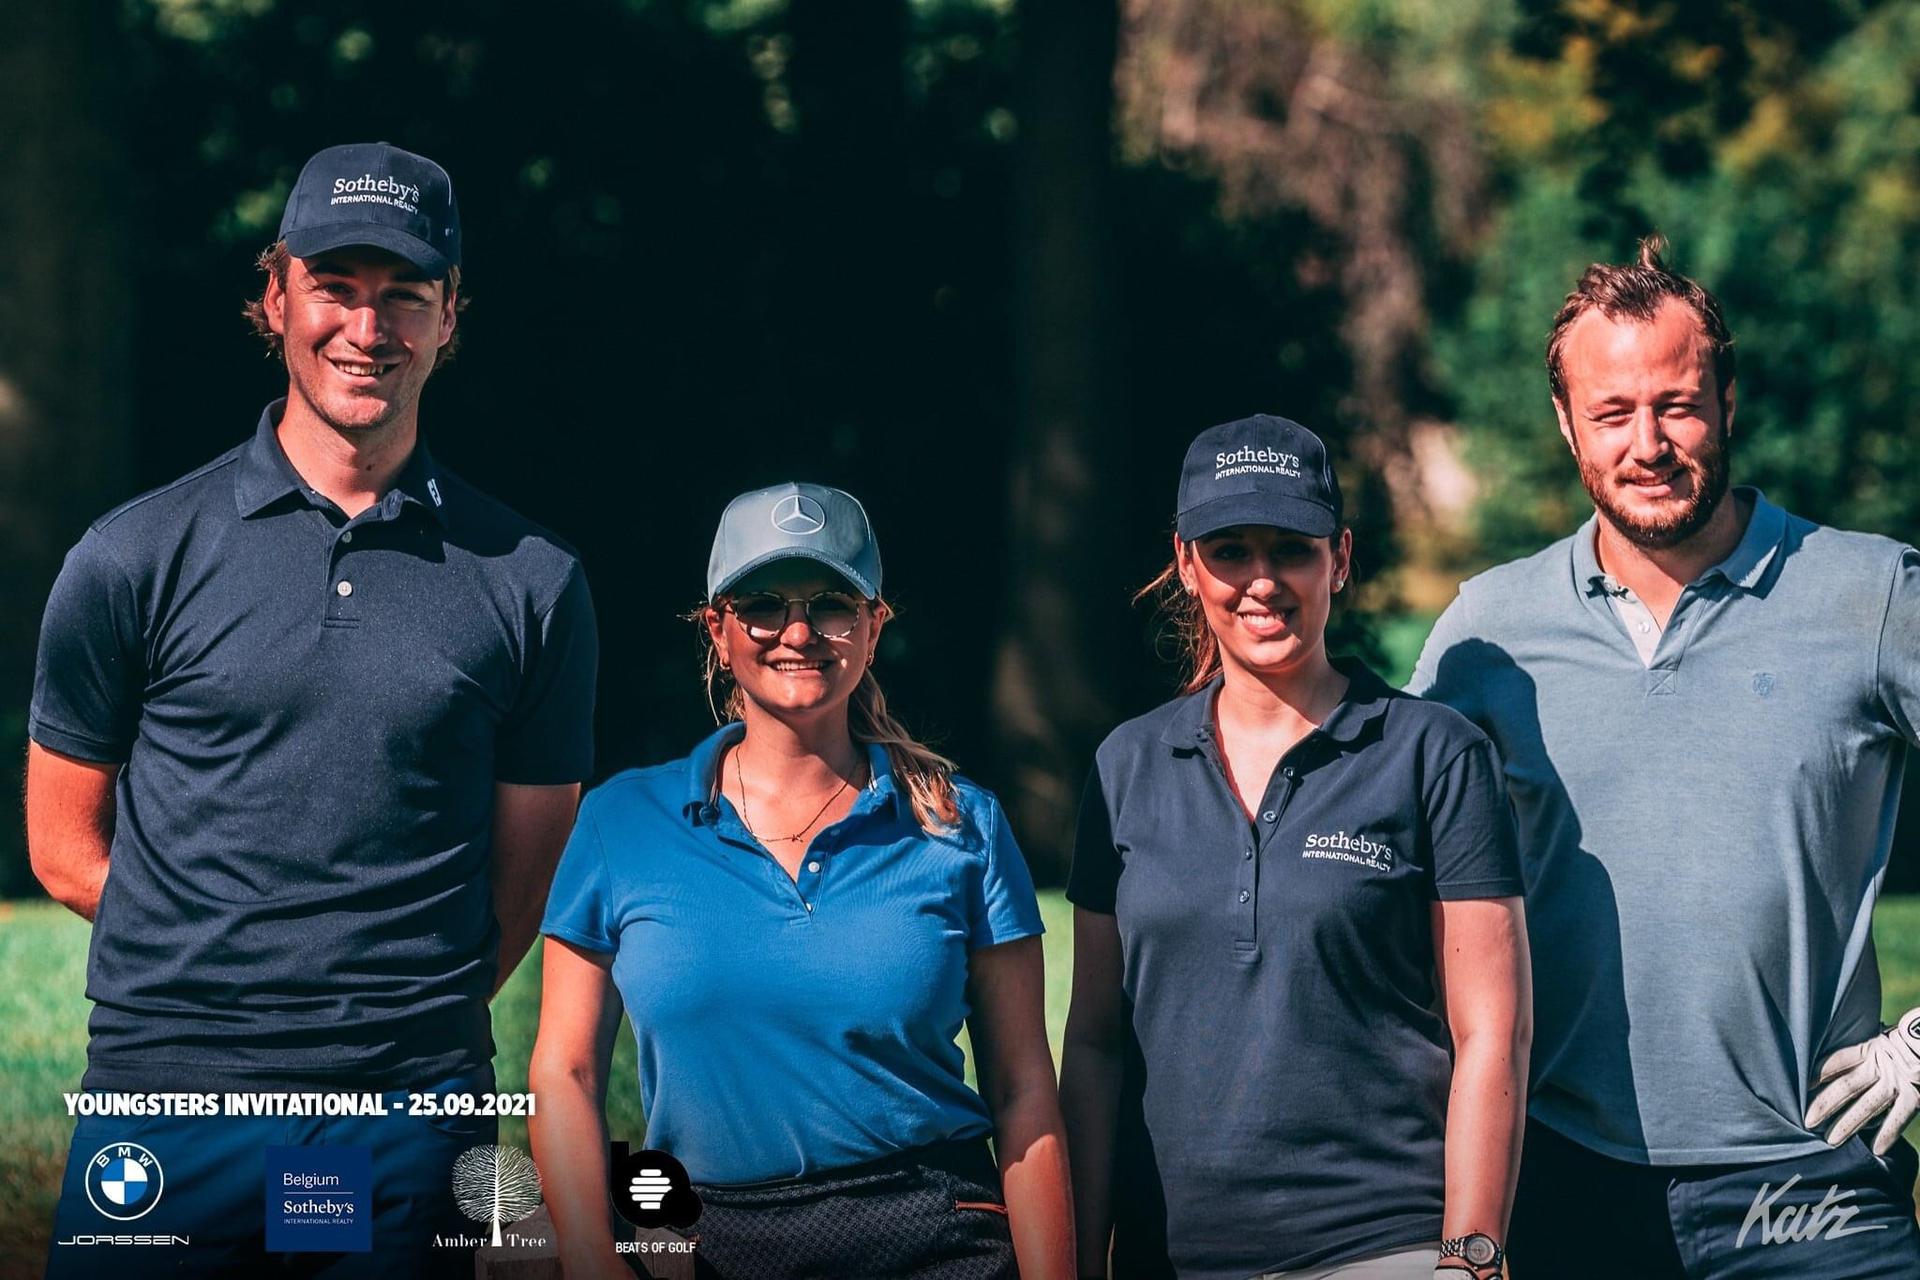 Our wonderful team for the young adults golf tournament organized by the pretigious Rinkven's golf club